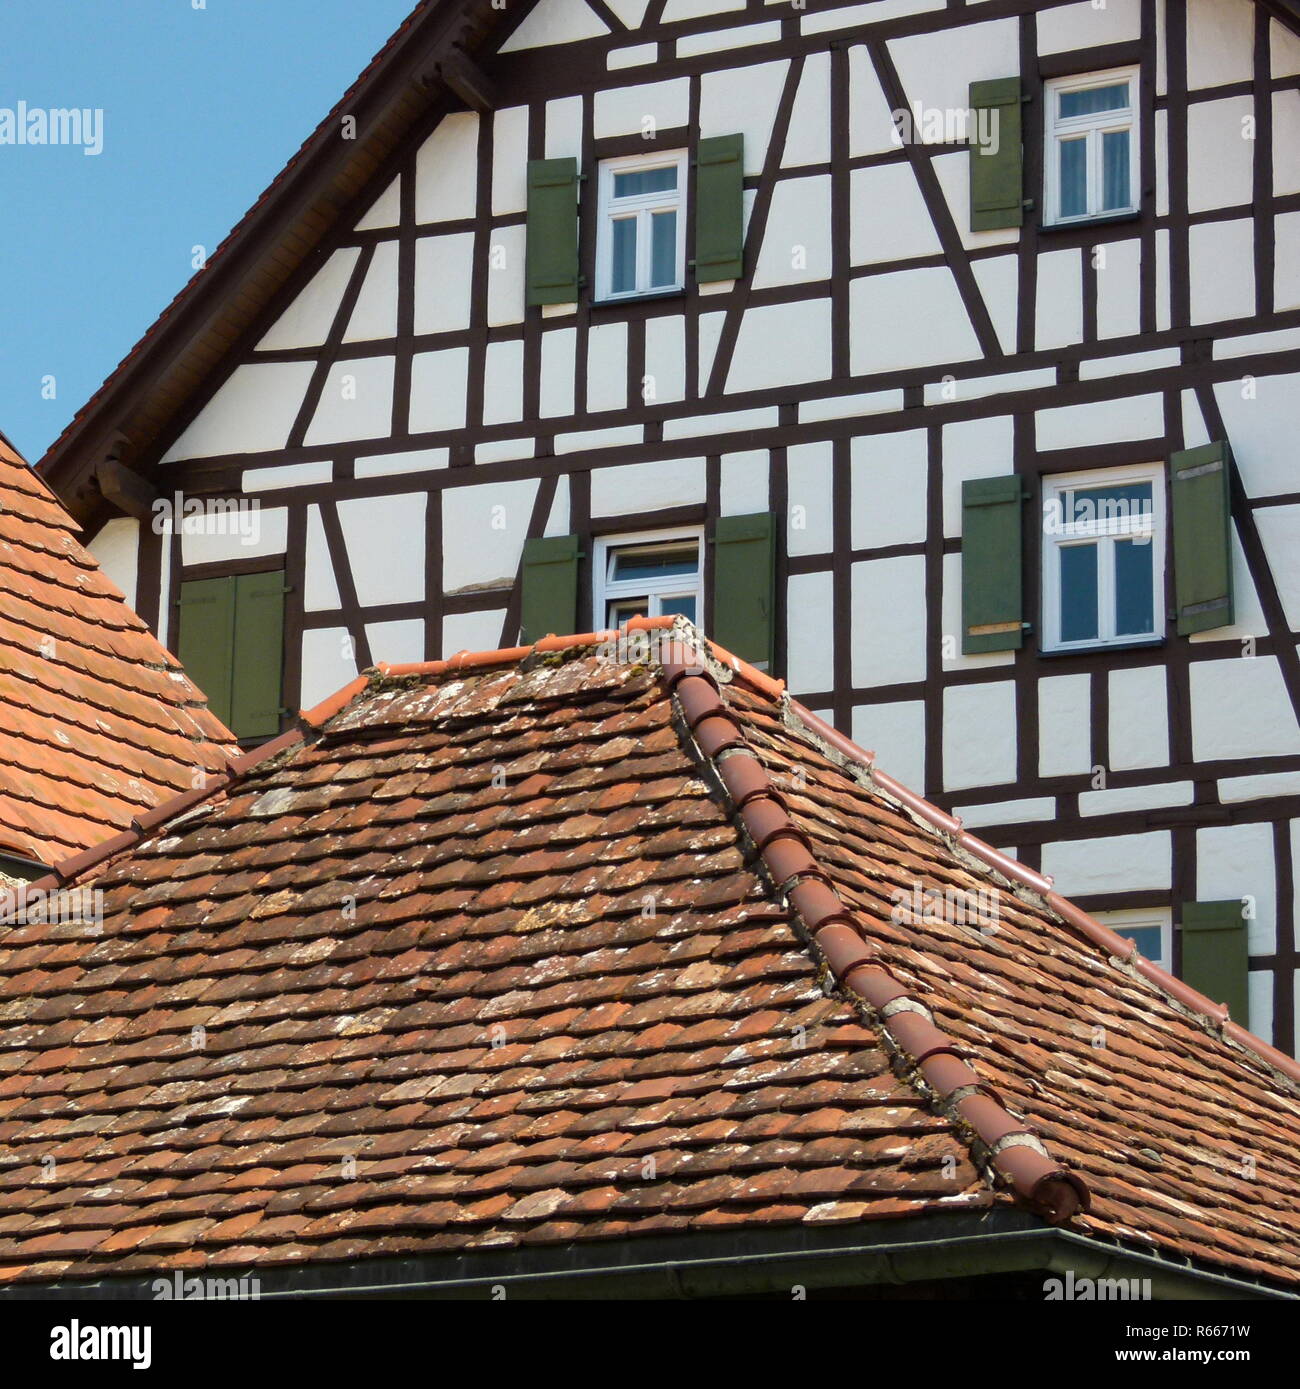 beautifully restored half-timbered house behind a tiled roof Stock Photo